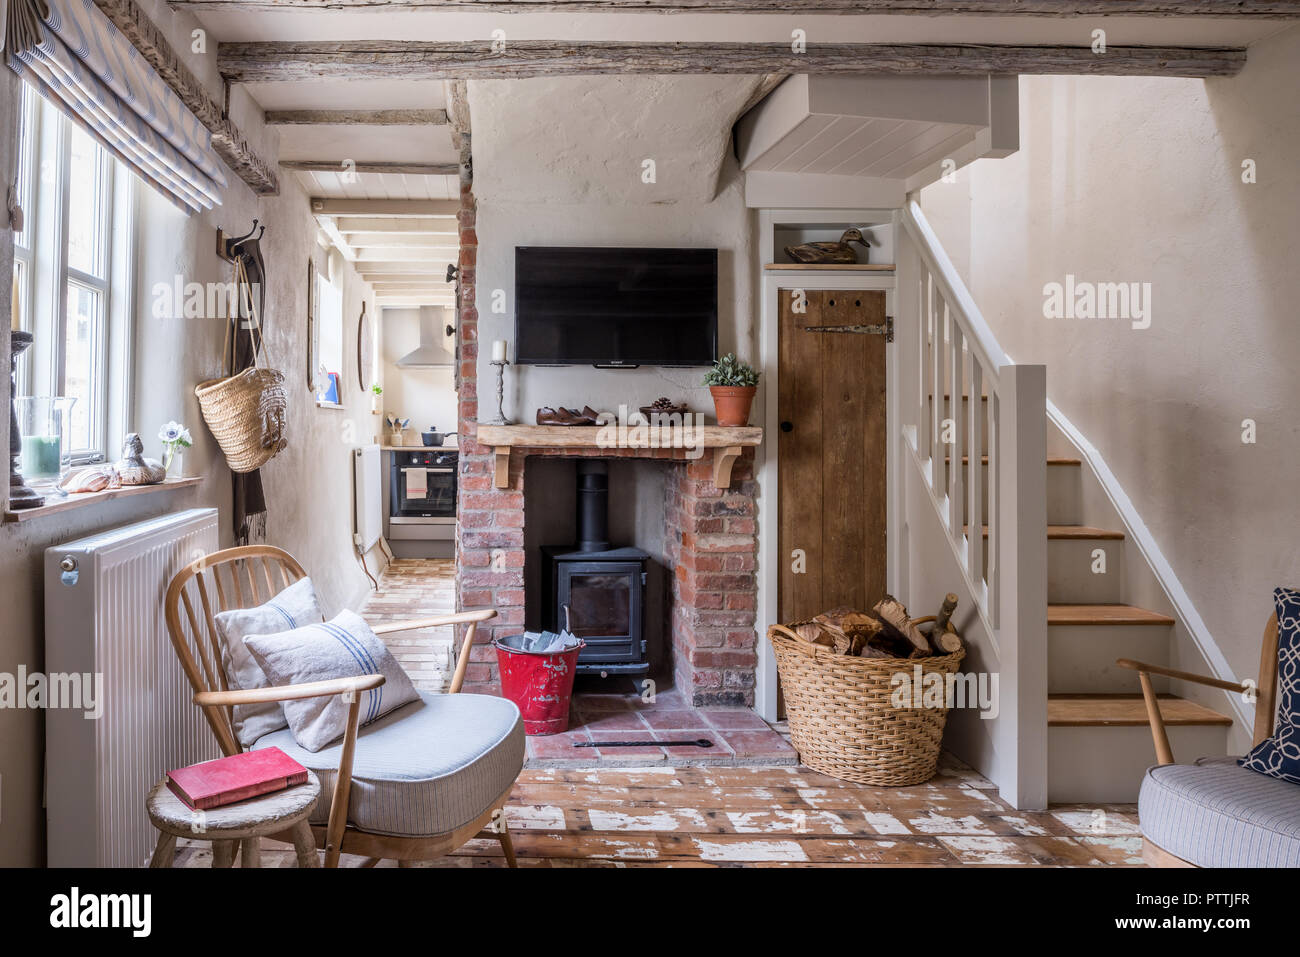 Stripped Ercol-style armchair and wall mounted TV above exposed brick fireplace with woodburner Stock Photo